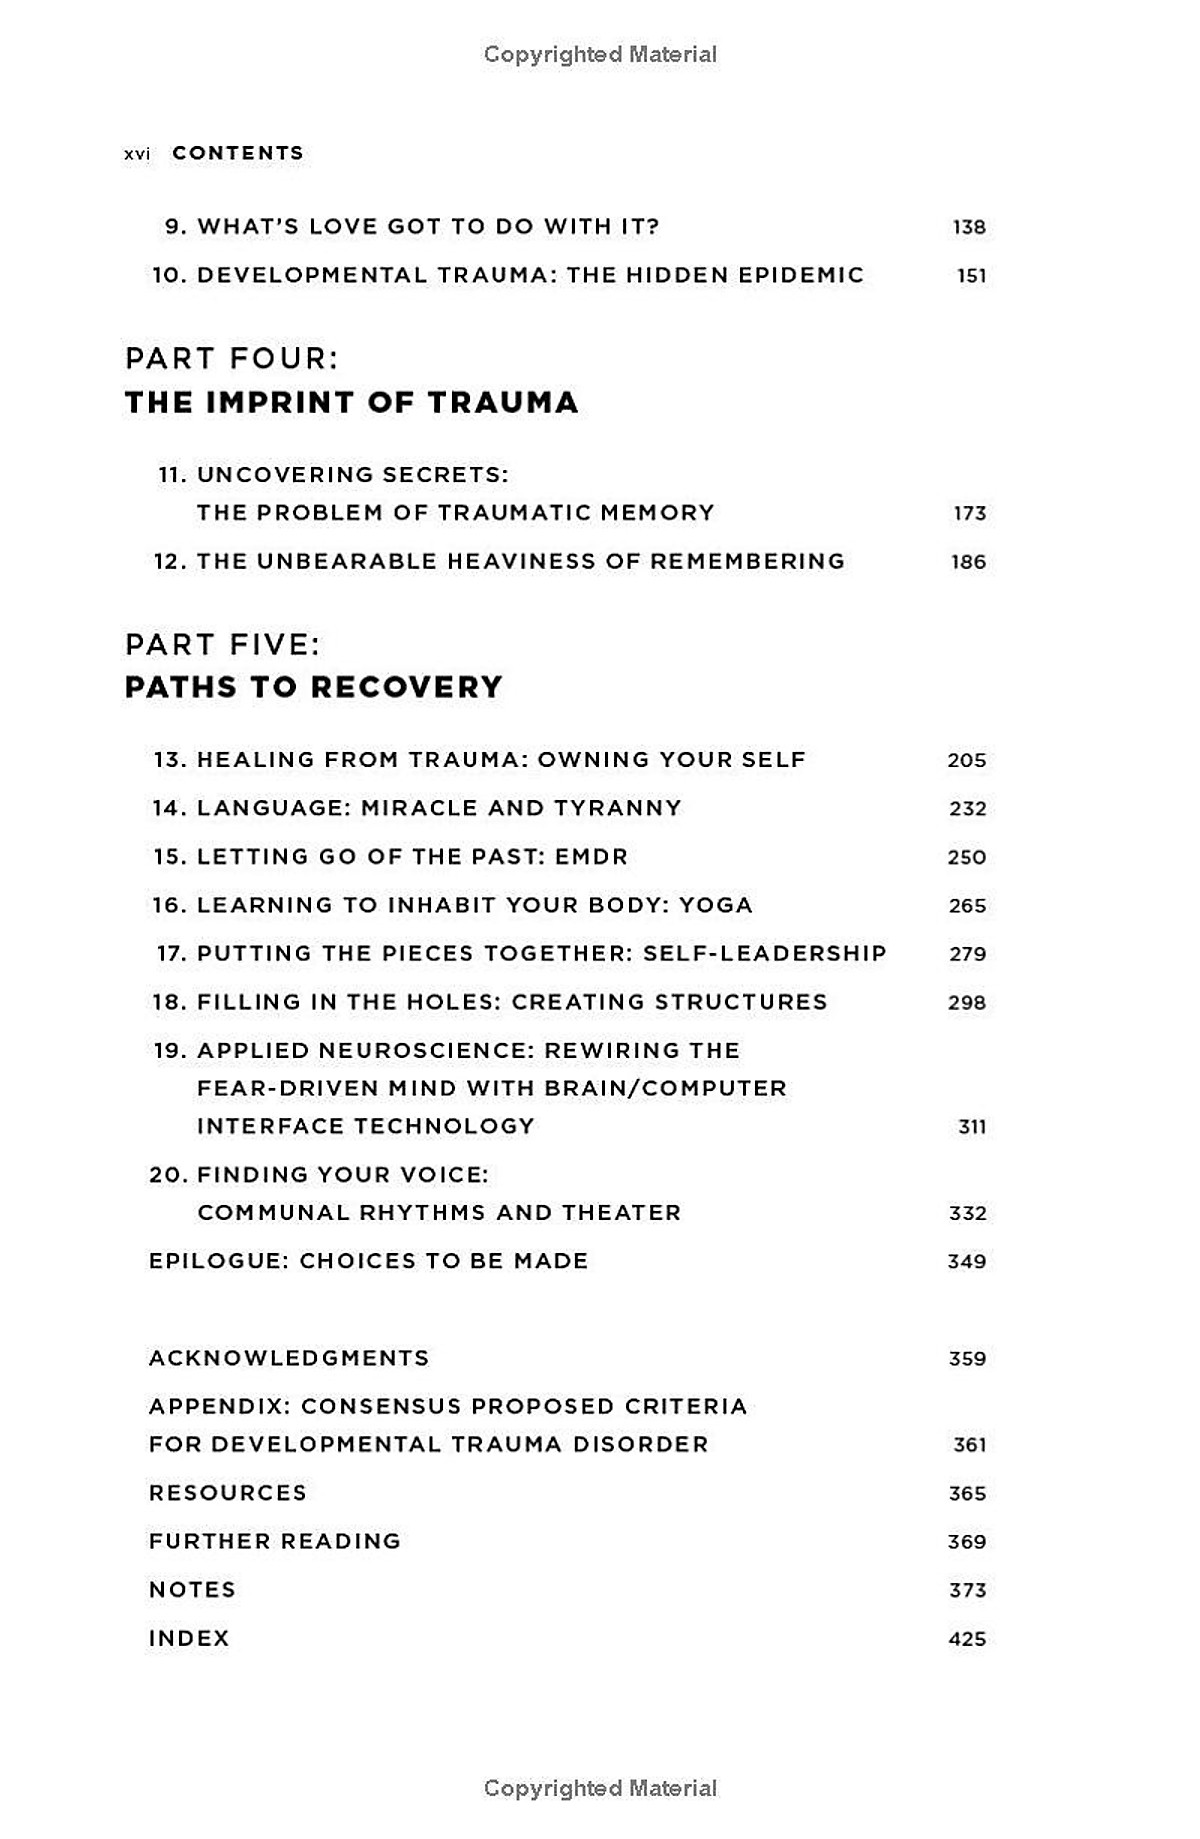 The Body Keeps The Score: Brain, Mind, And Body In The Healing Of Trauma